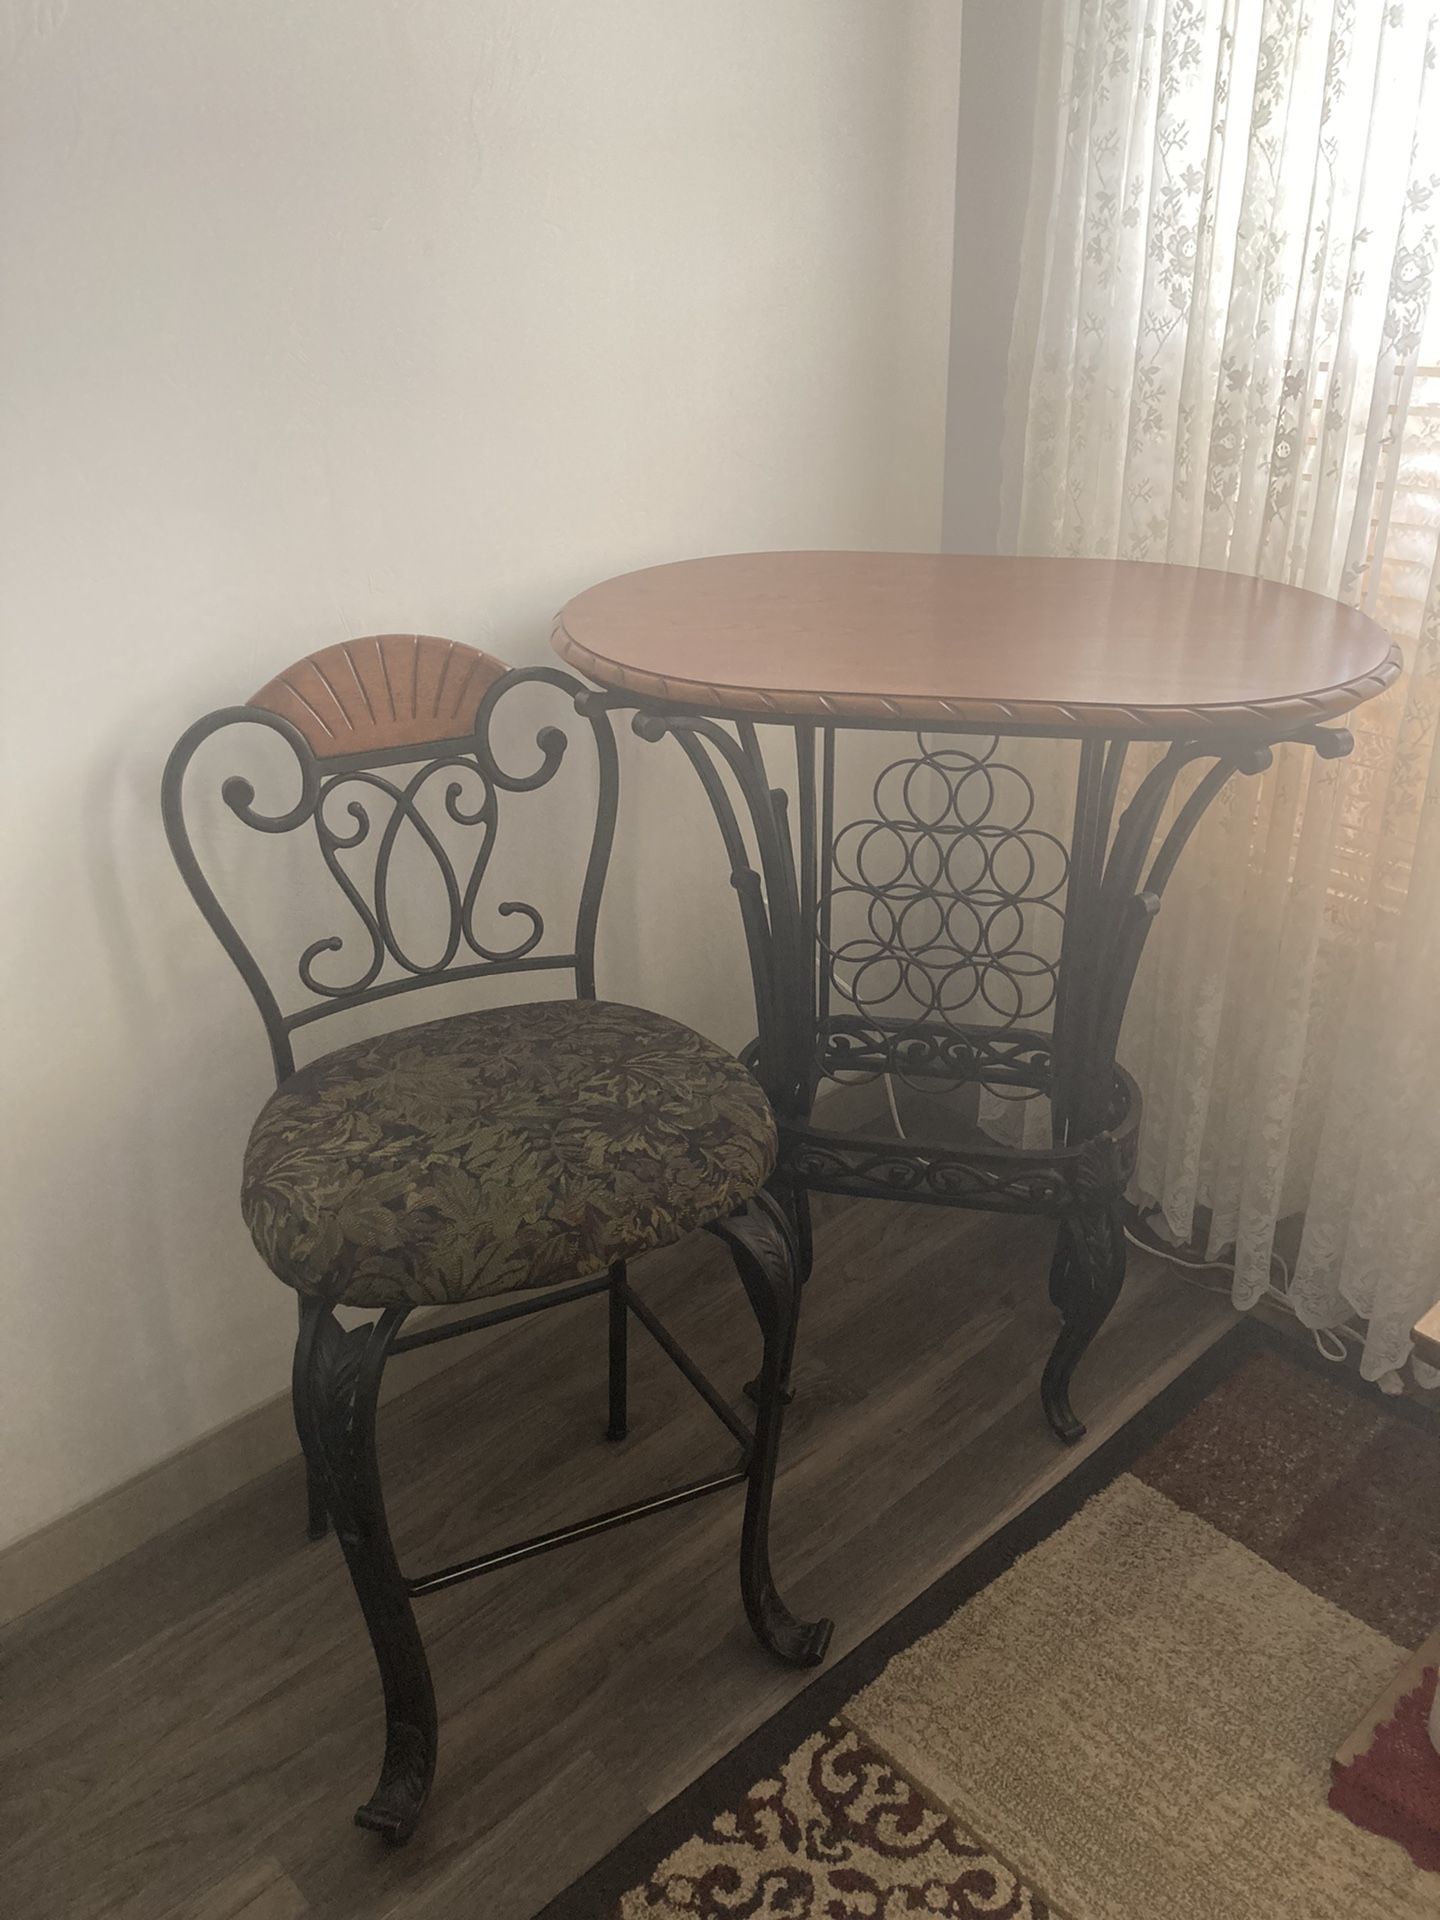 Wine Rack Table & 2 Matching Chairs  Measurement In Description